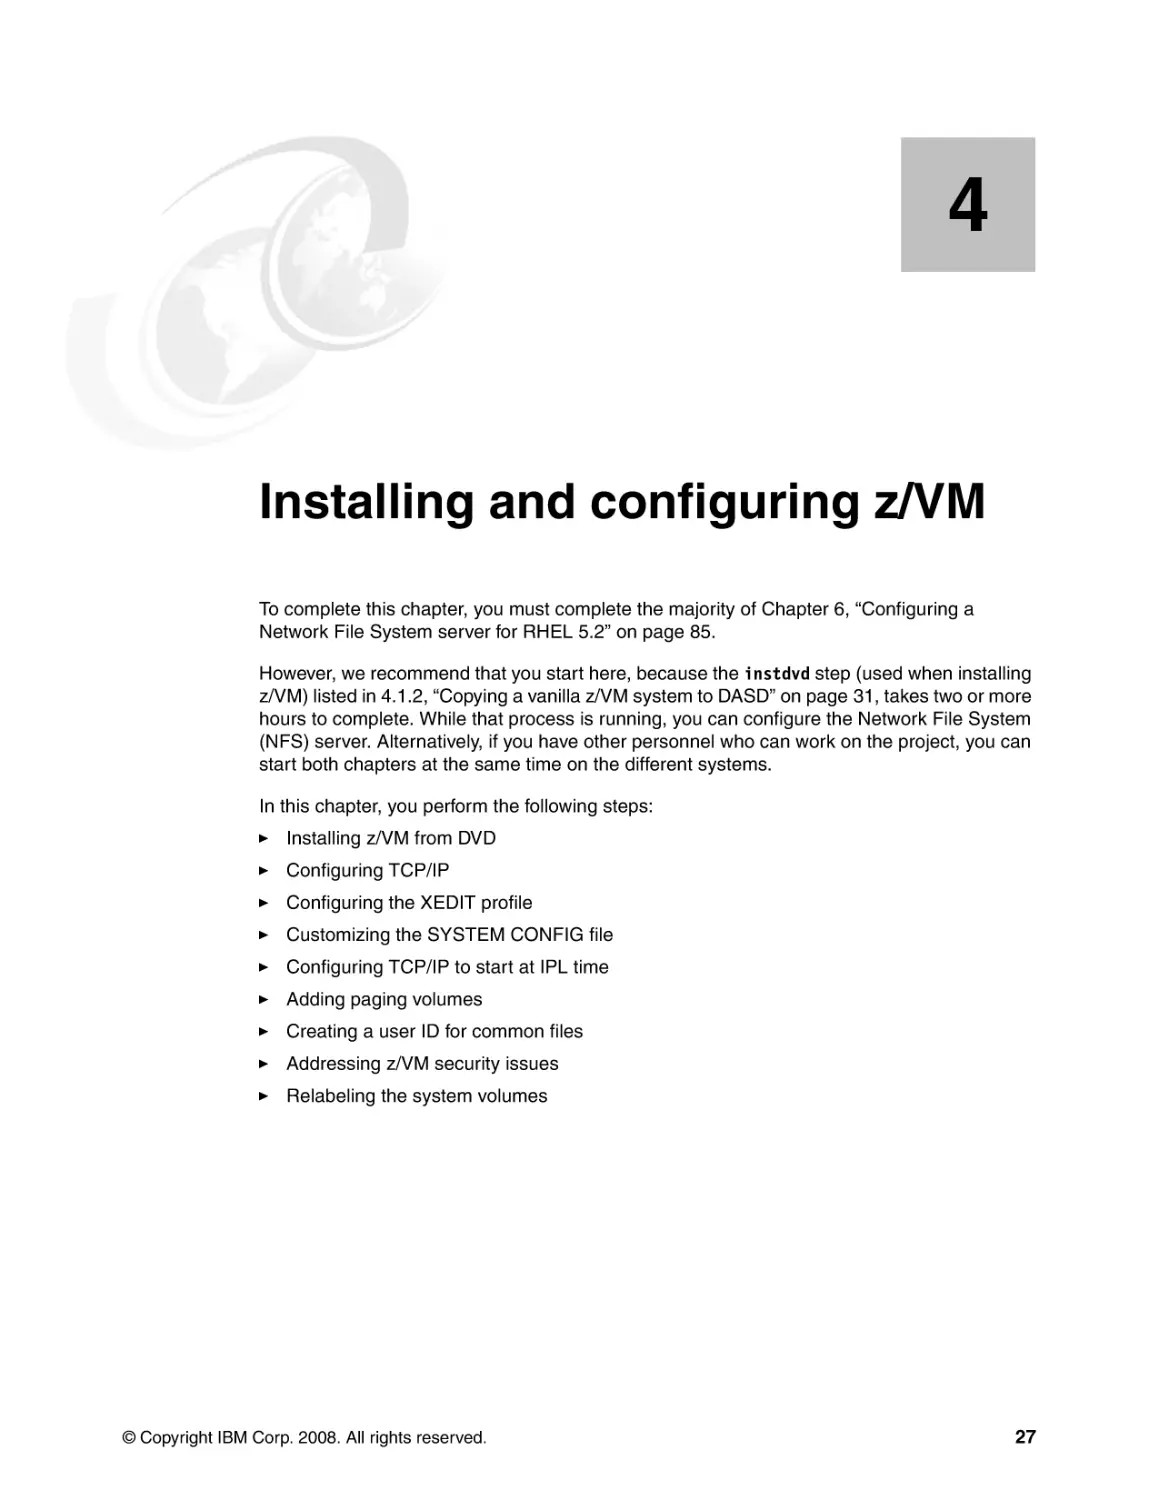 Chapter 4. Installing and configuring z/VM